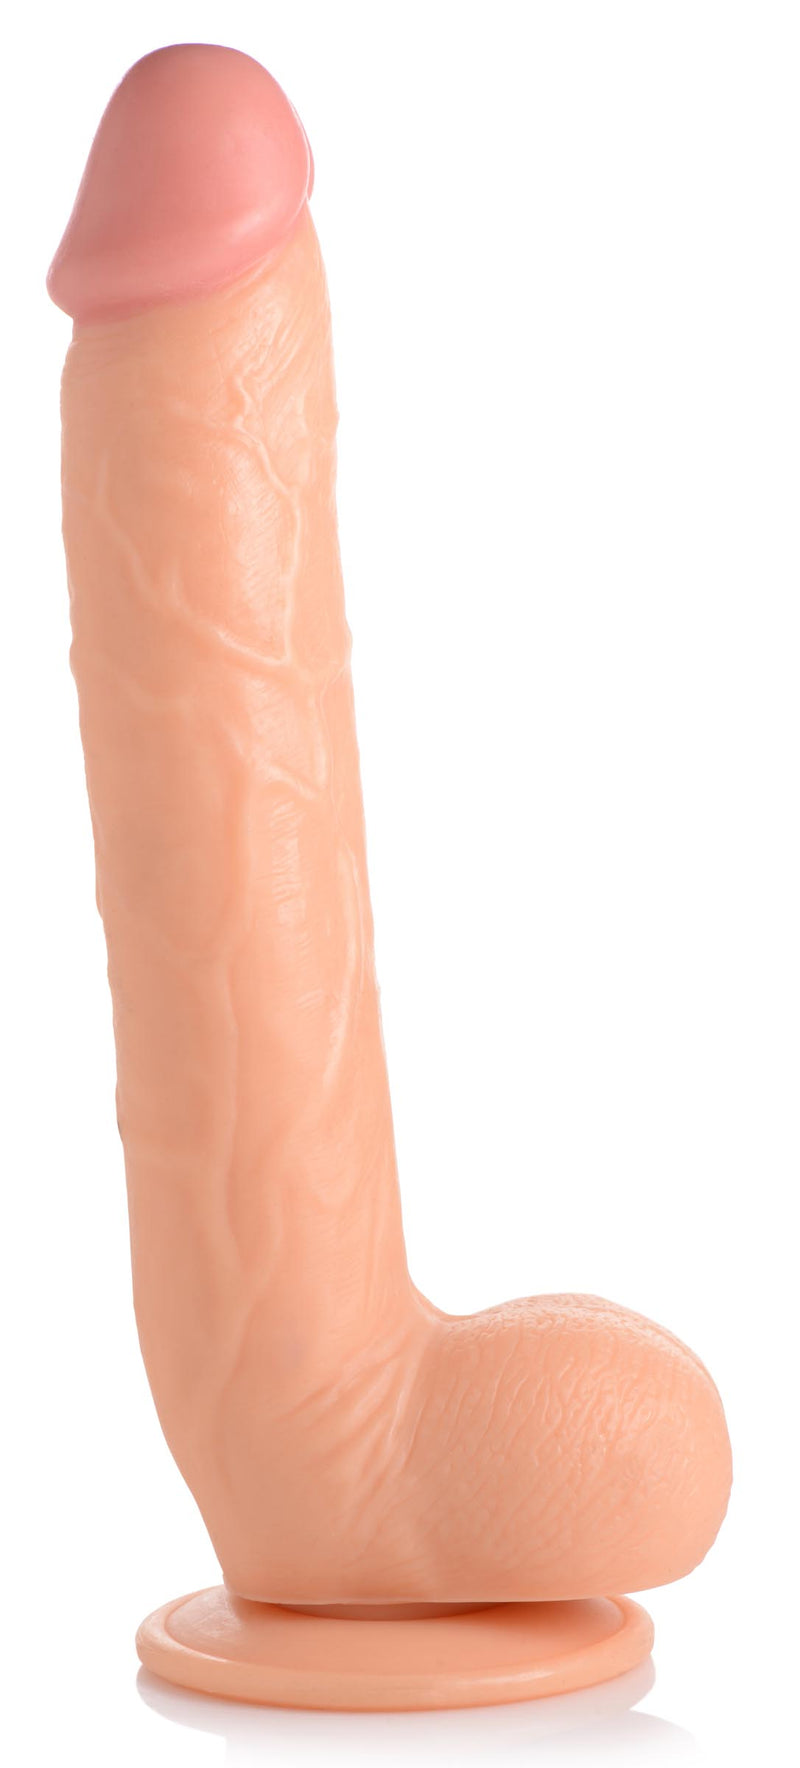 Long Logan 10 Inch Realistic Dildo with Balls - Light | XR Brands Dildos from Master Cock